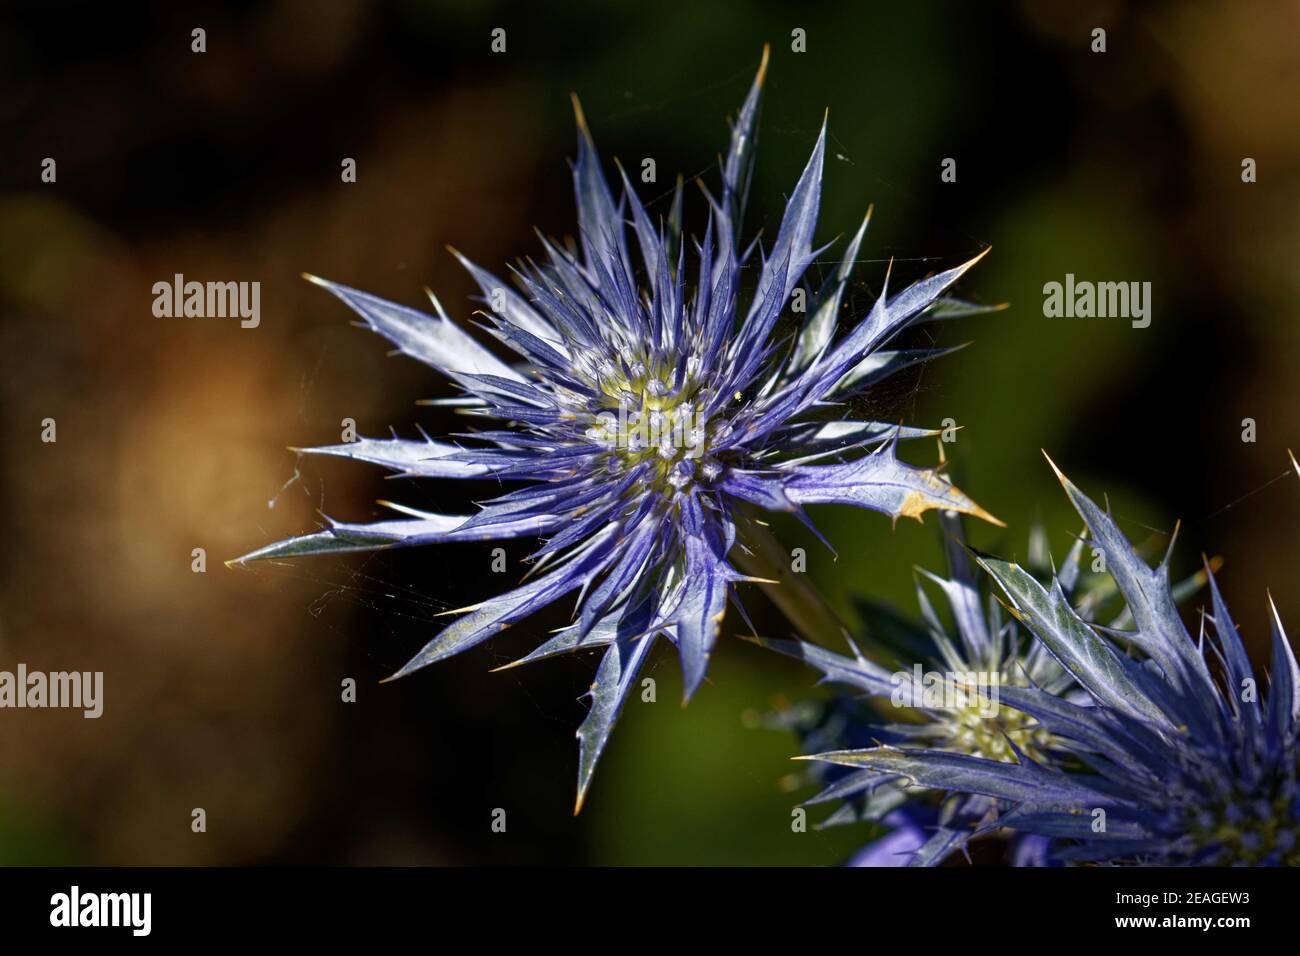 Eryngium is a genus of flowering plants in the family Apiaceae. There are about 250 species. The genus has a cosmopolitan distribution. Stock Photo